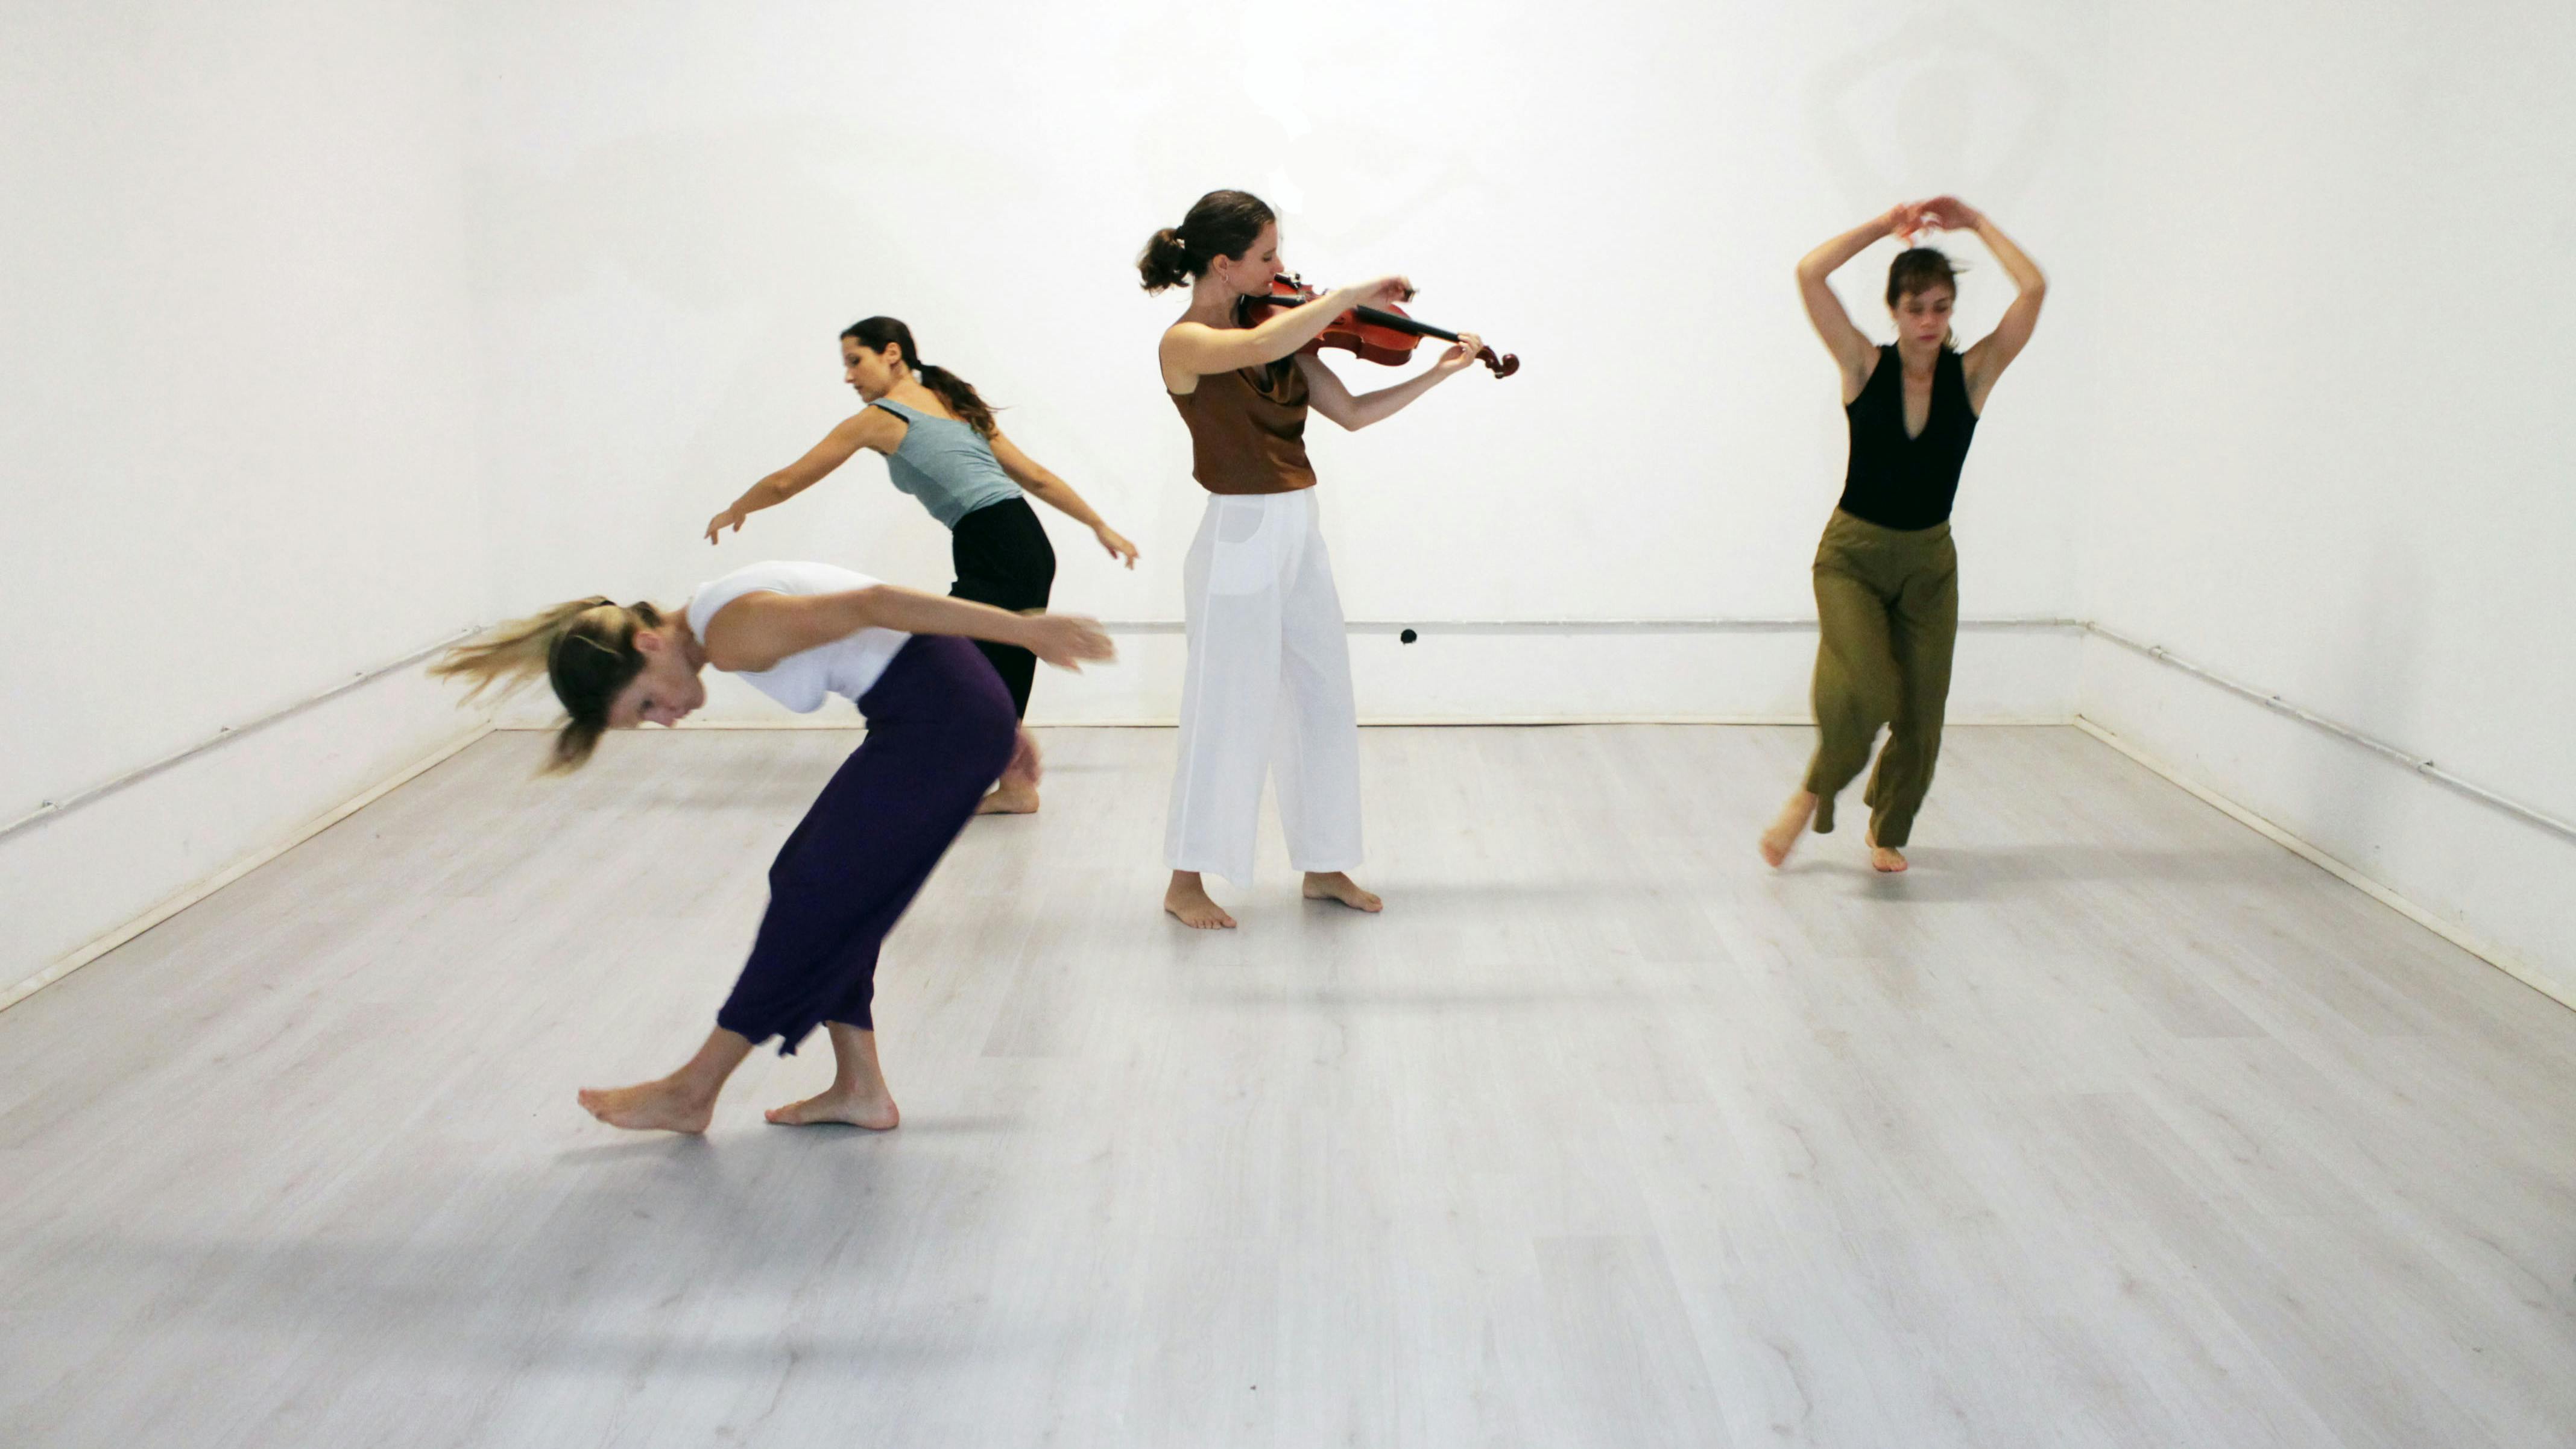 A violinist in the center of the room plays and three performers dance around her